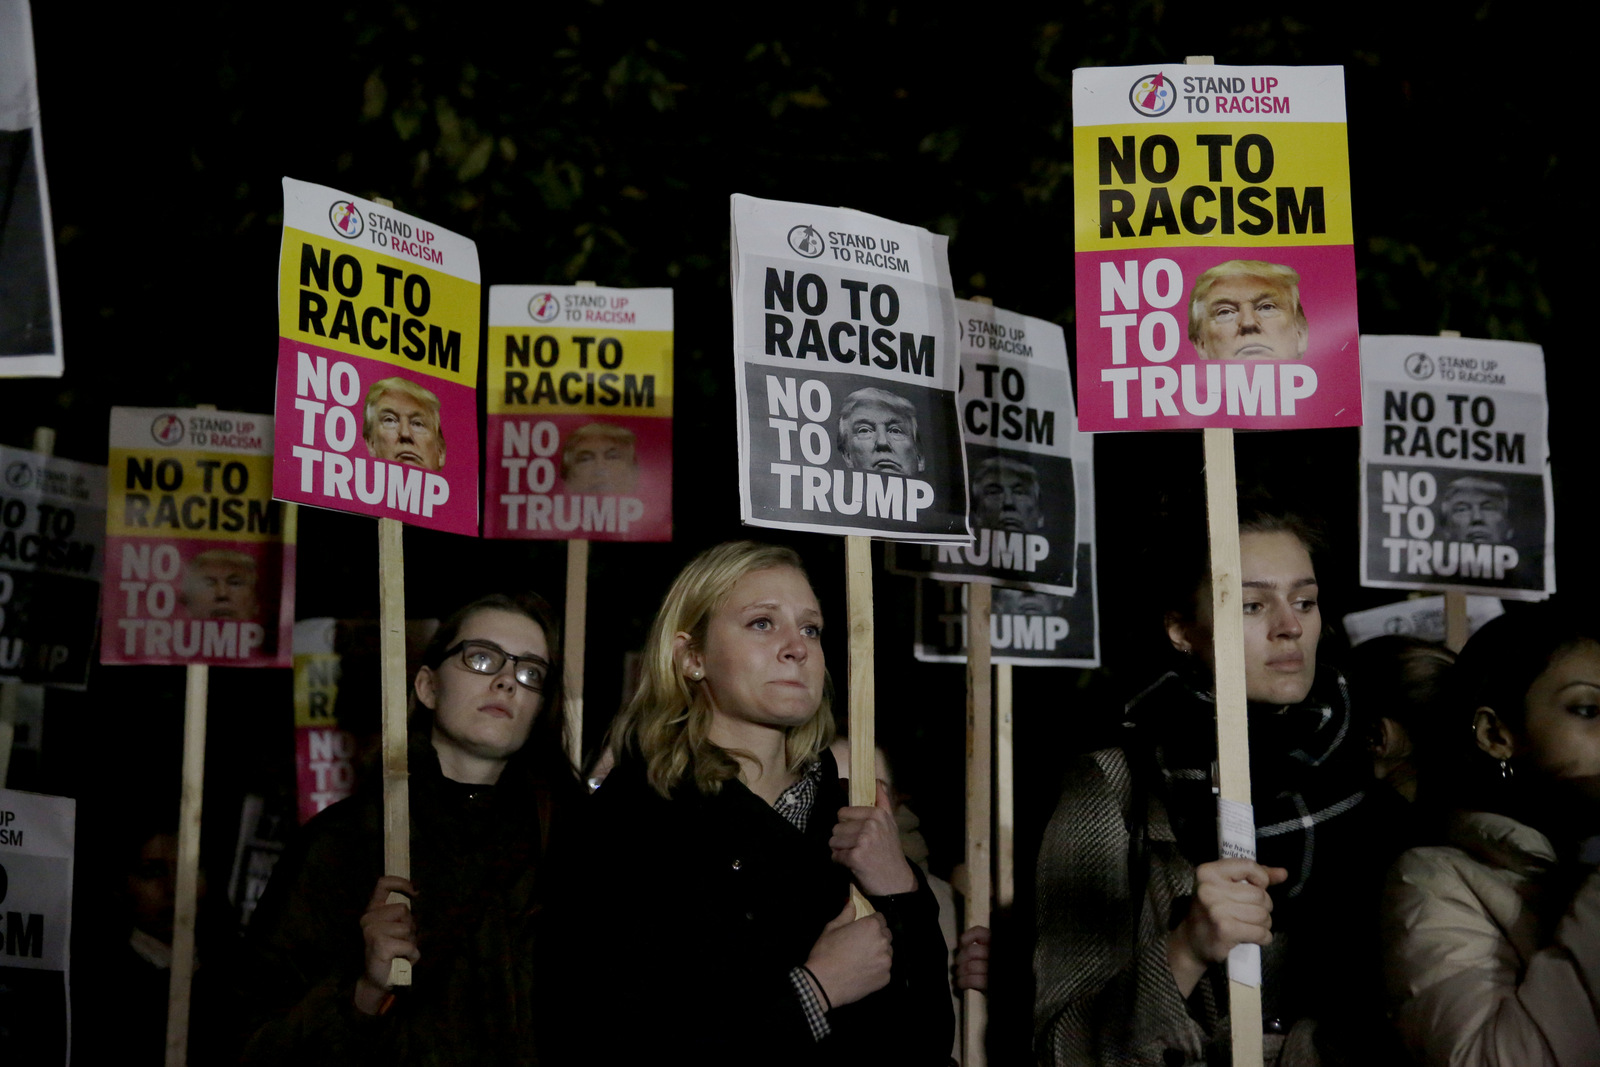 People hold placards as they take part in an anti-racism protest against President-elect Donald Trump winning the American election, outside the U.S. embassy in London, Wednesday, Nov. 9, 2016. (AP/Matt Dunham)